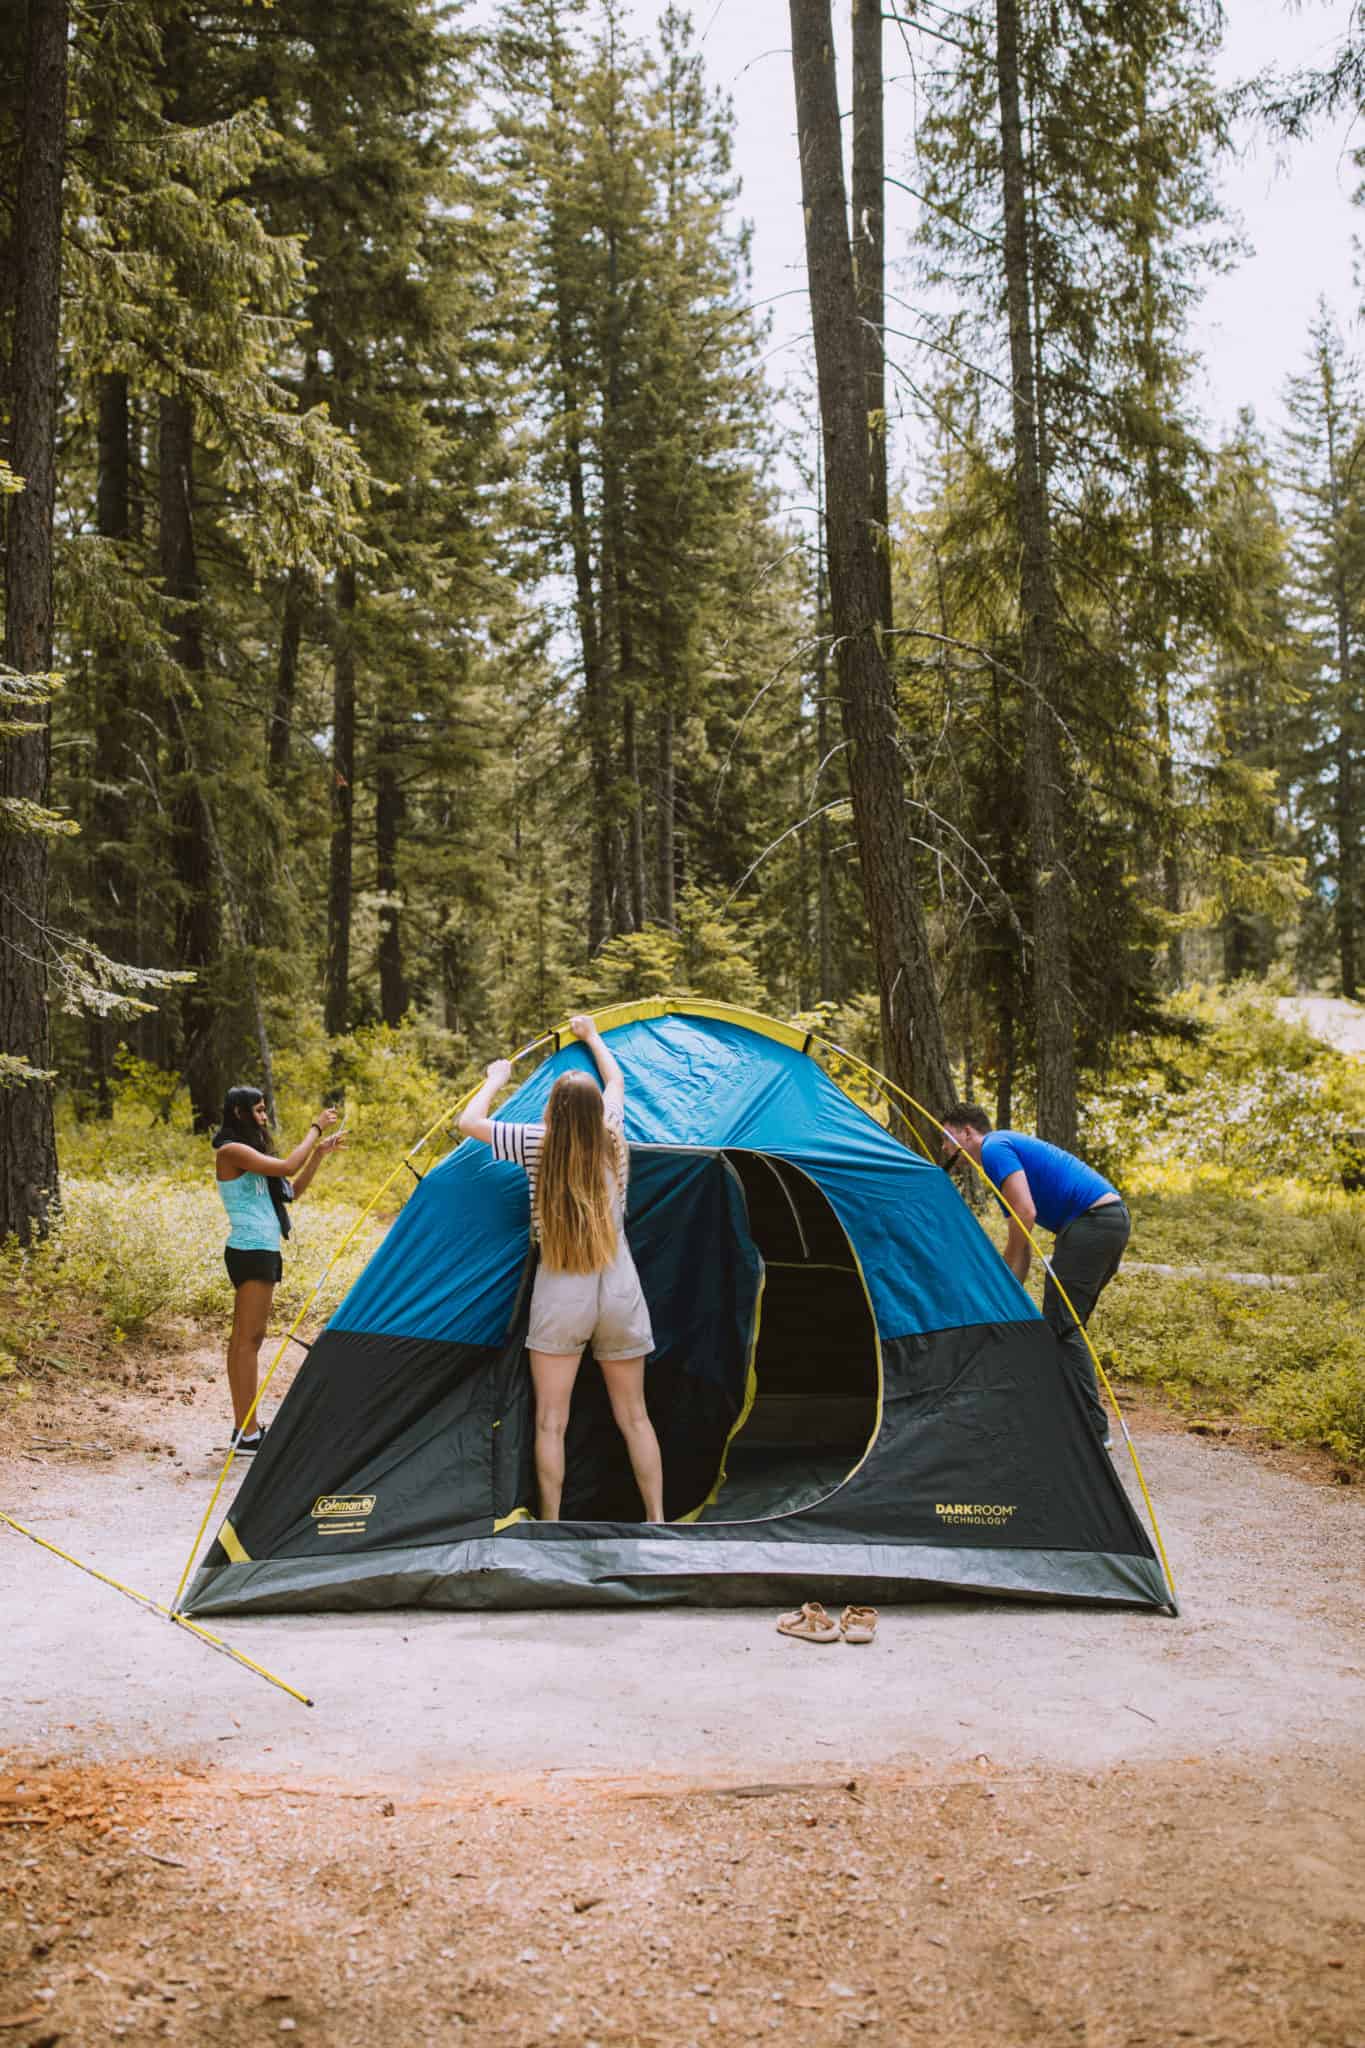 Camping Checklist - Tent